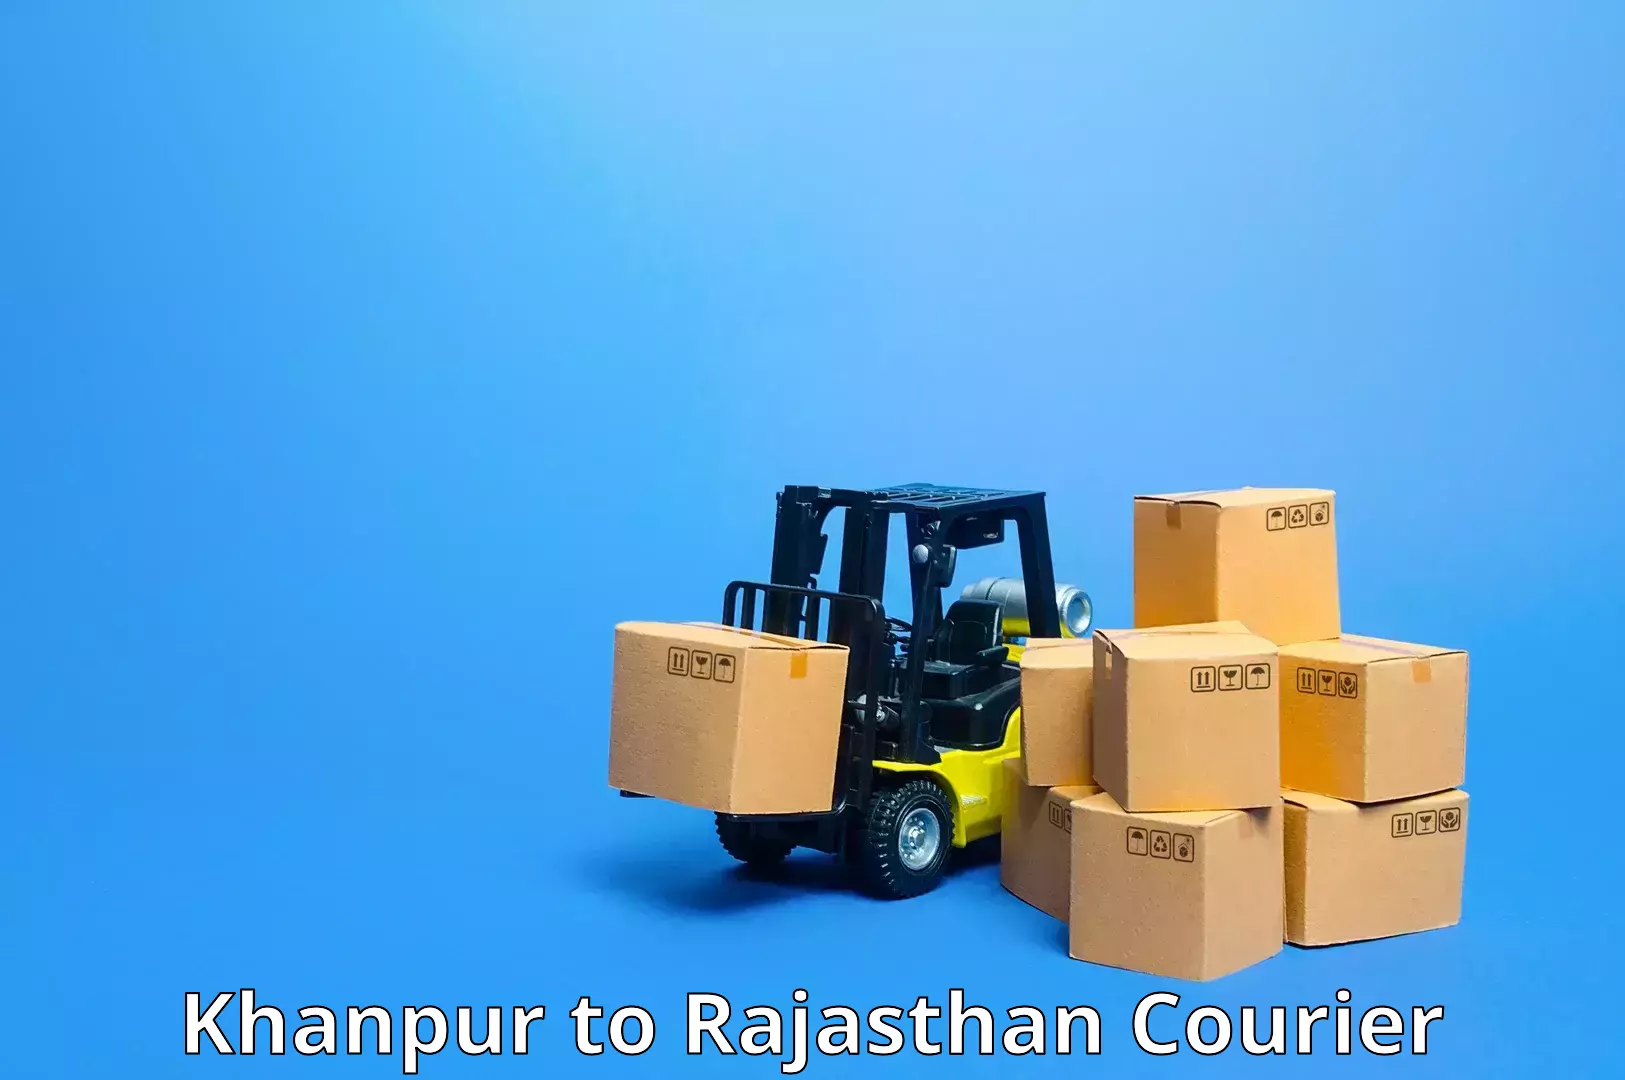 Automated shipping in Khanpur to Dholpur